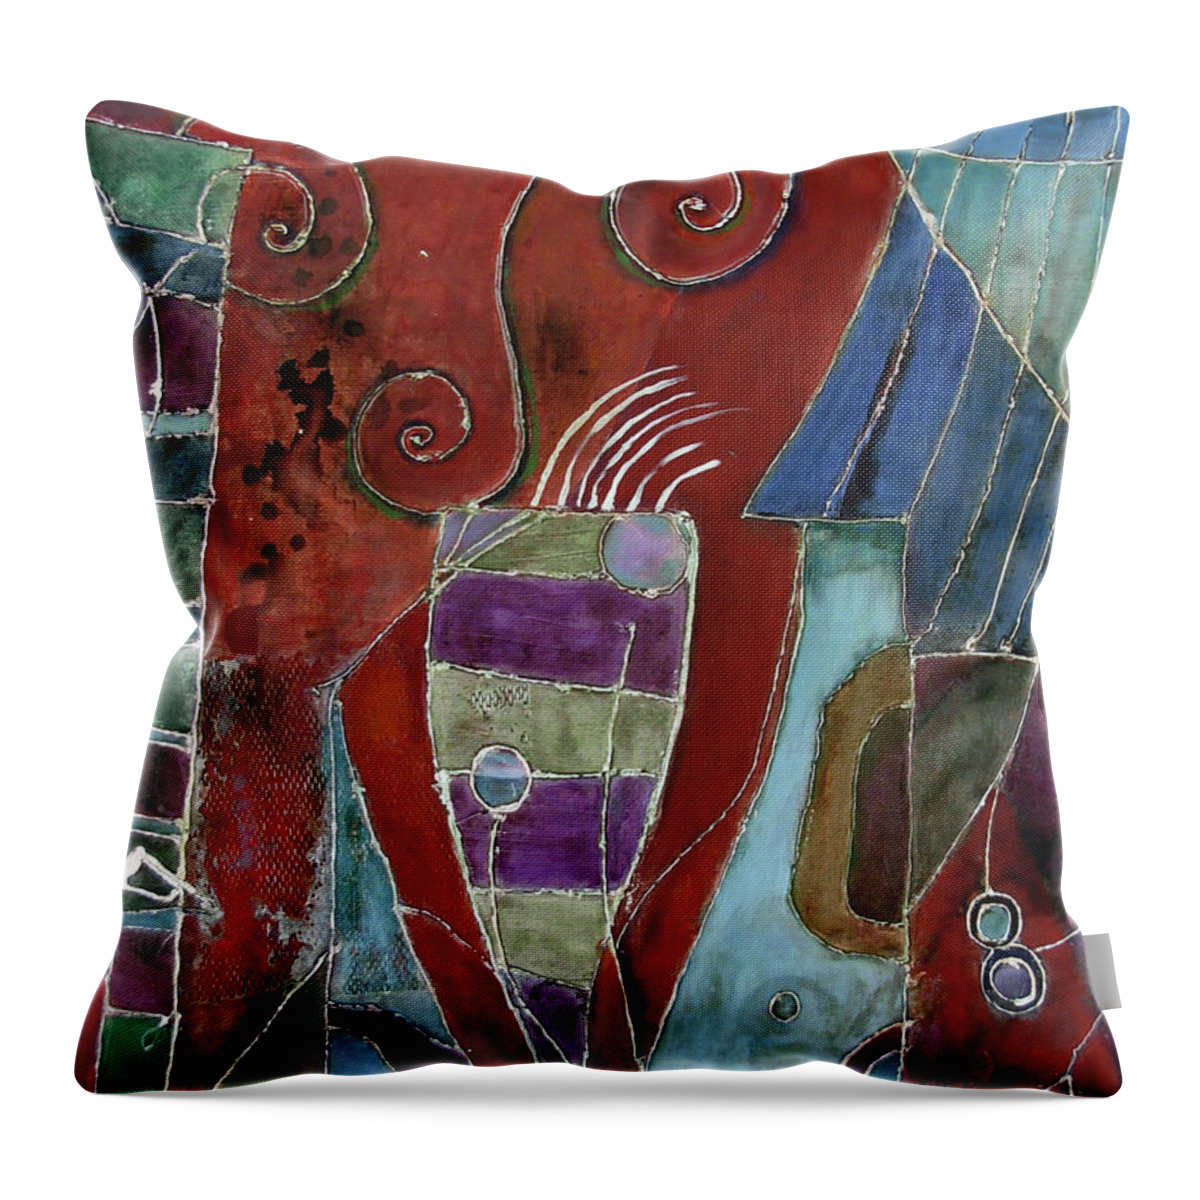 Landscape Throw Pillow featuring the painting Astica by Lory MacDonald